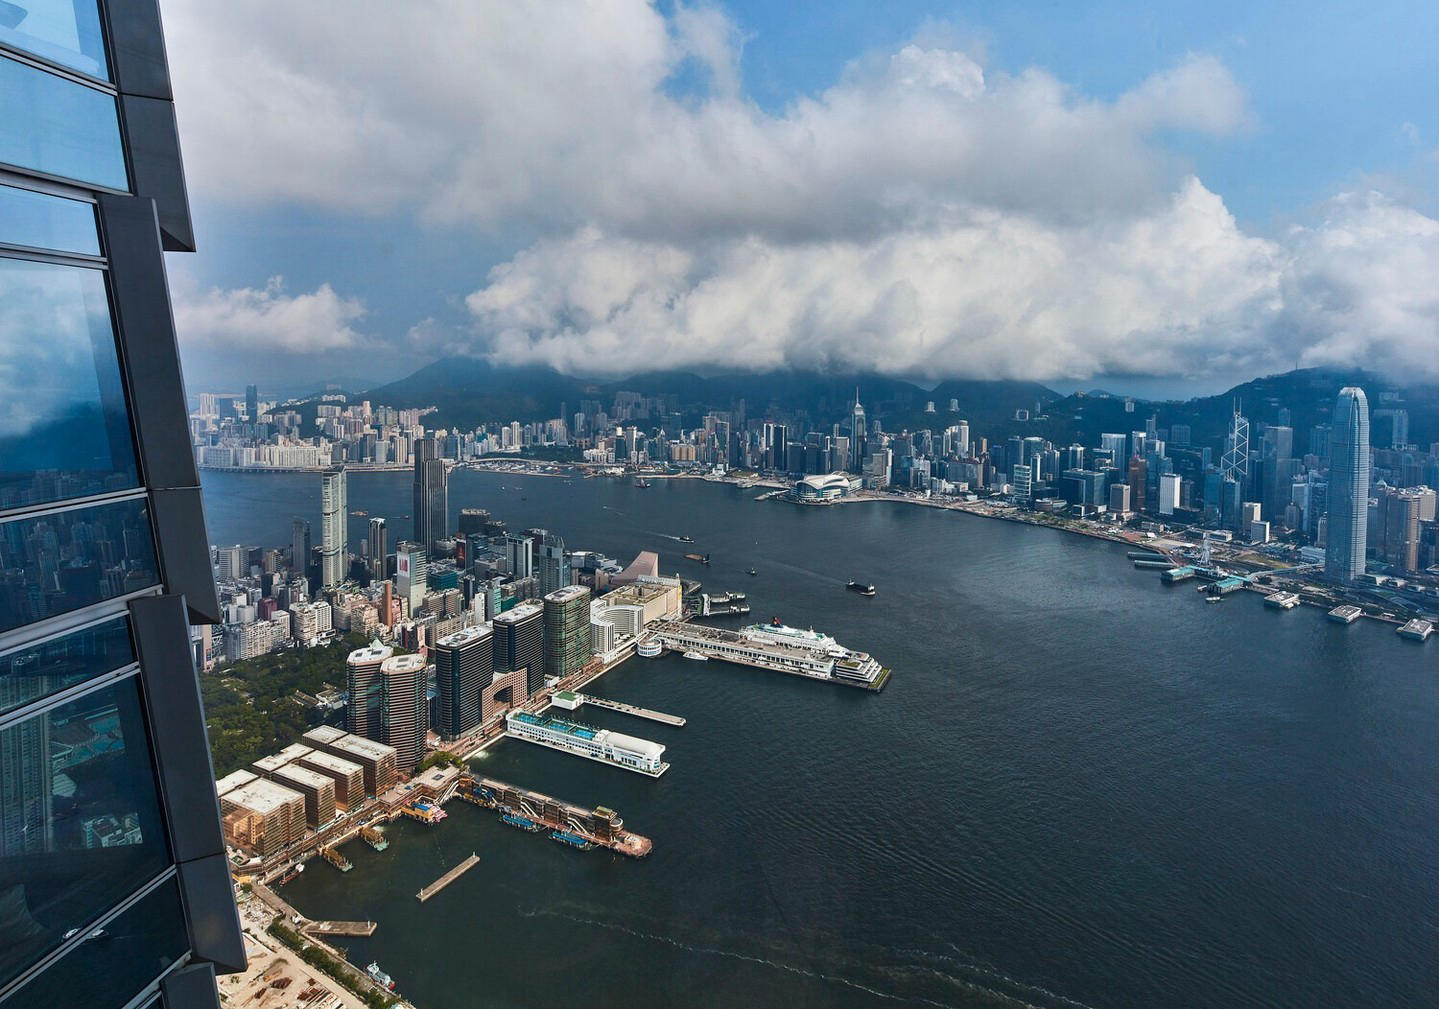 Begin your three-day home-away-from-home retreat in the sky at The Ritz-Carlton, Hong Kong